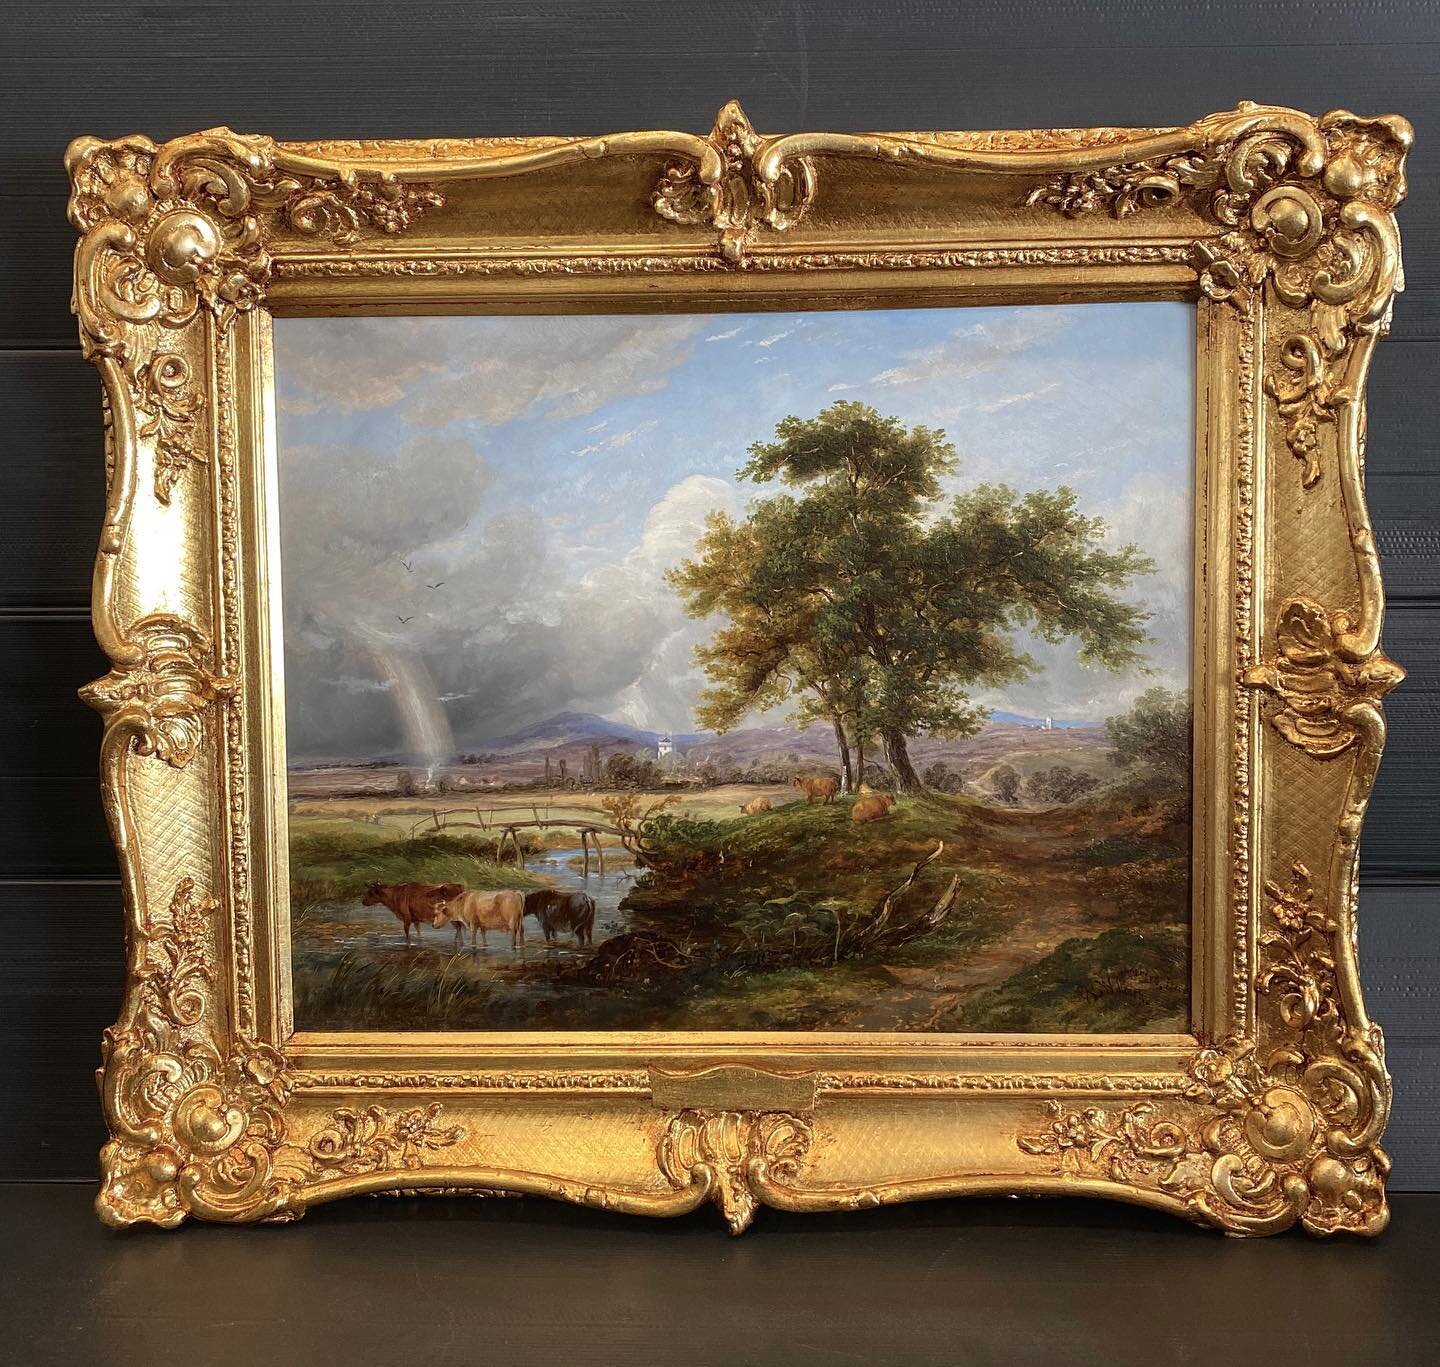 Our recent restoration and gilding of this ornate frame housing an oil on canvas titled&rsquo; &lsquo;Up Country&rsquo; cleaned and restored by @dawsonrestoration